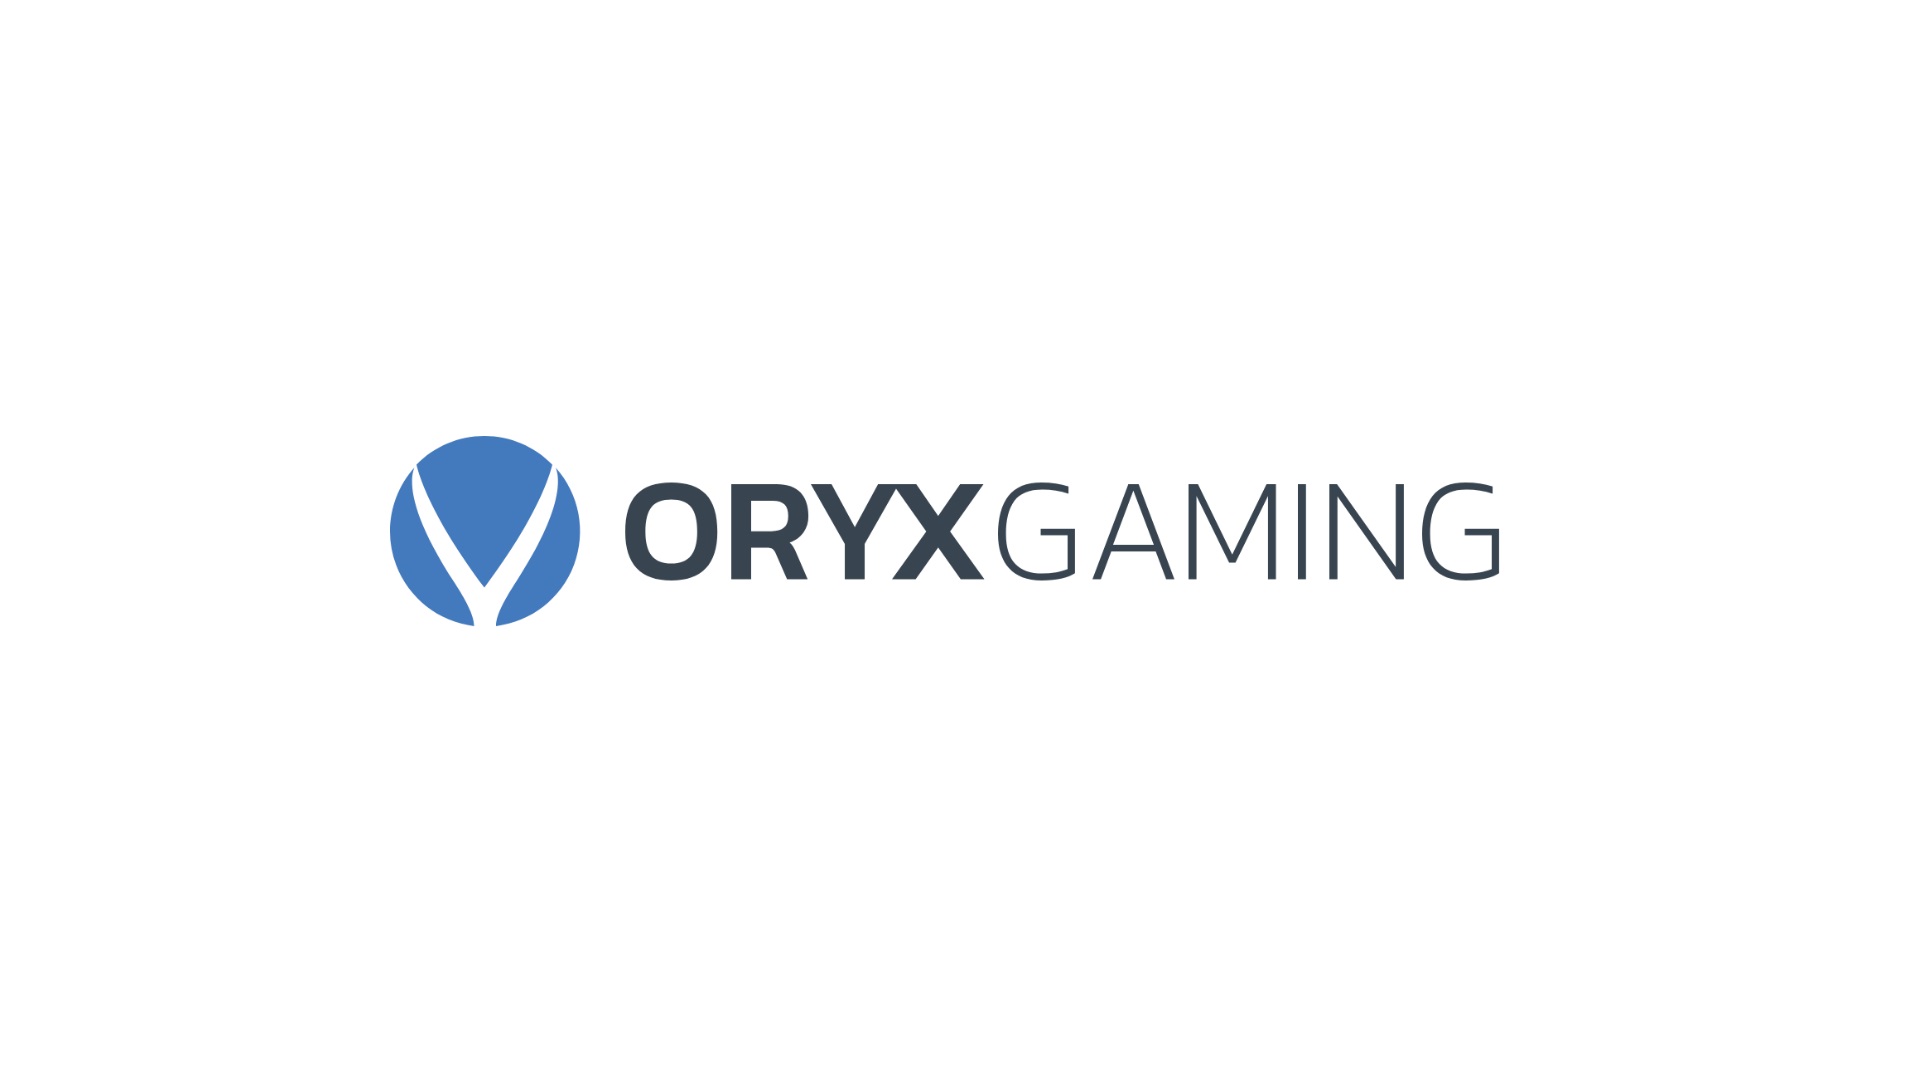 Bragg’s ORYX Gaming powers new Dutch iGaming brand 711.nl